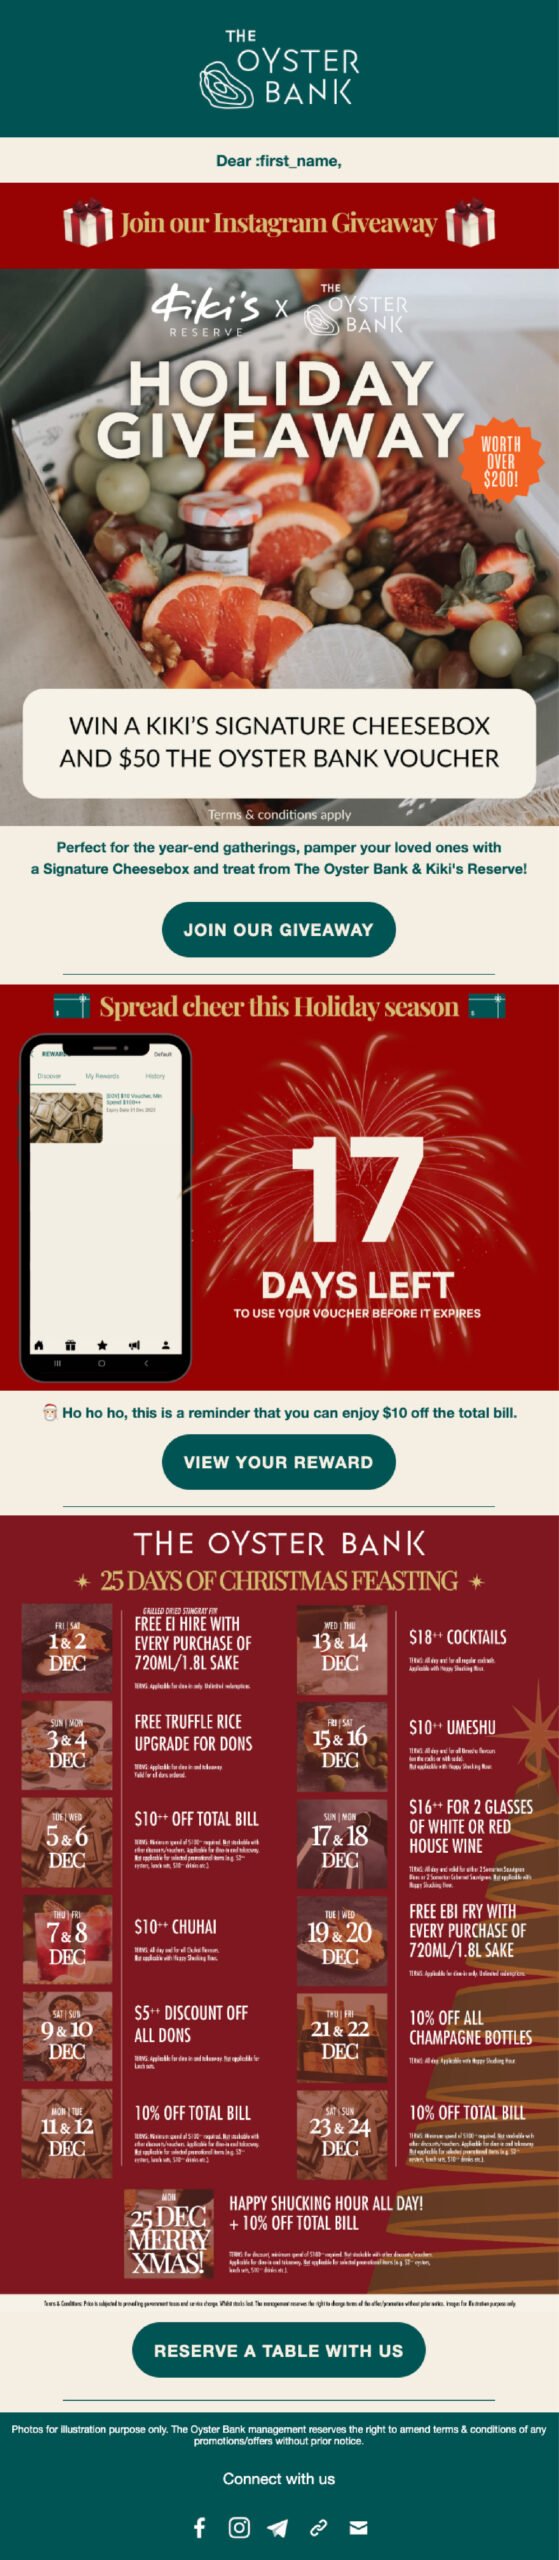 The Oyster Bank_Newsletter